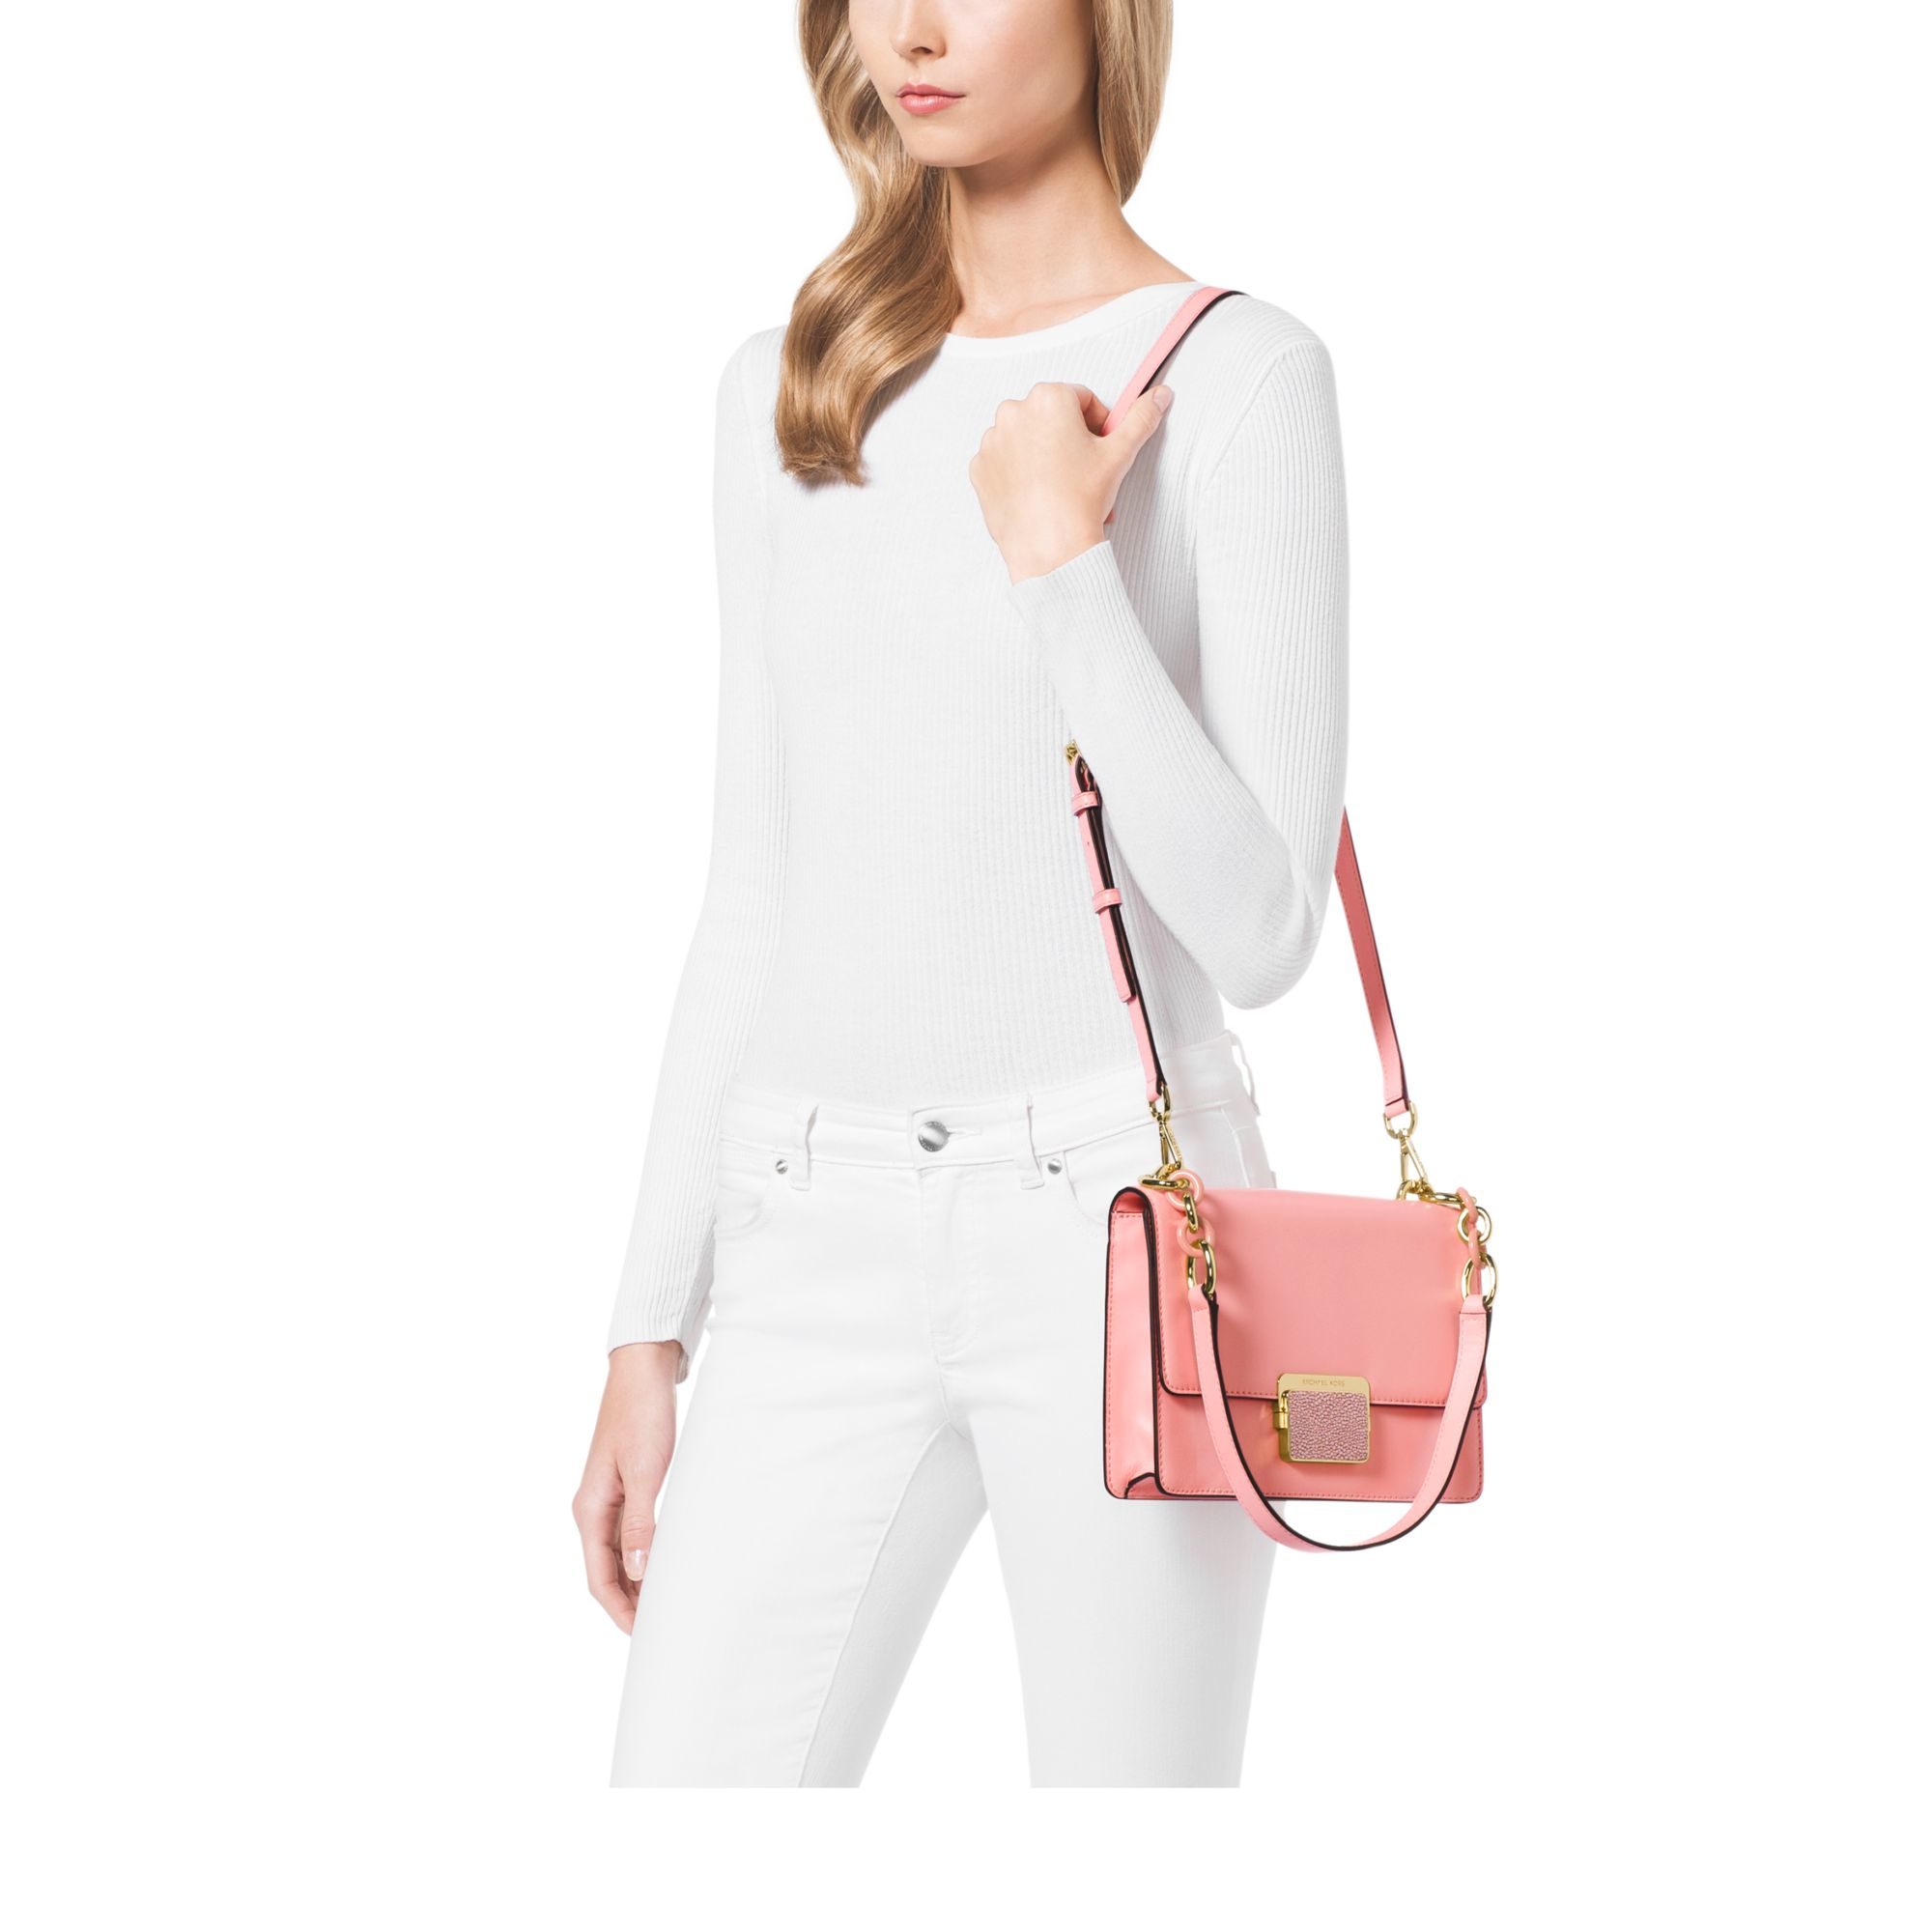 Michael Kors Cynthia Small Leather Shoulder Bag in Pale Pink (Pink) - Lyst